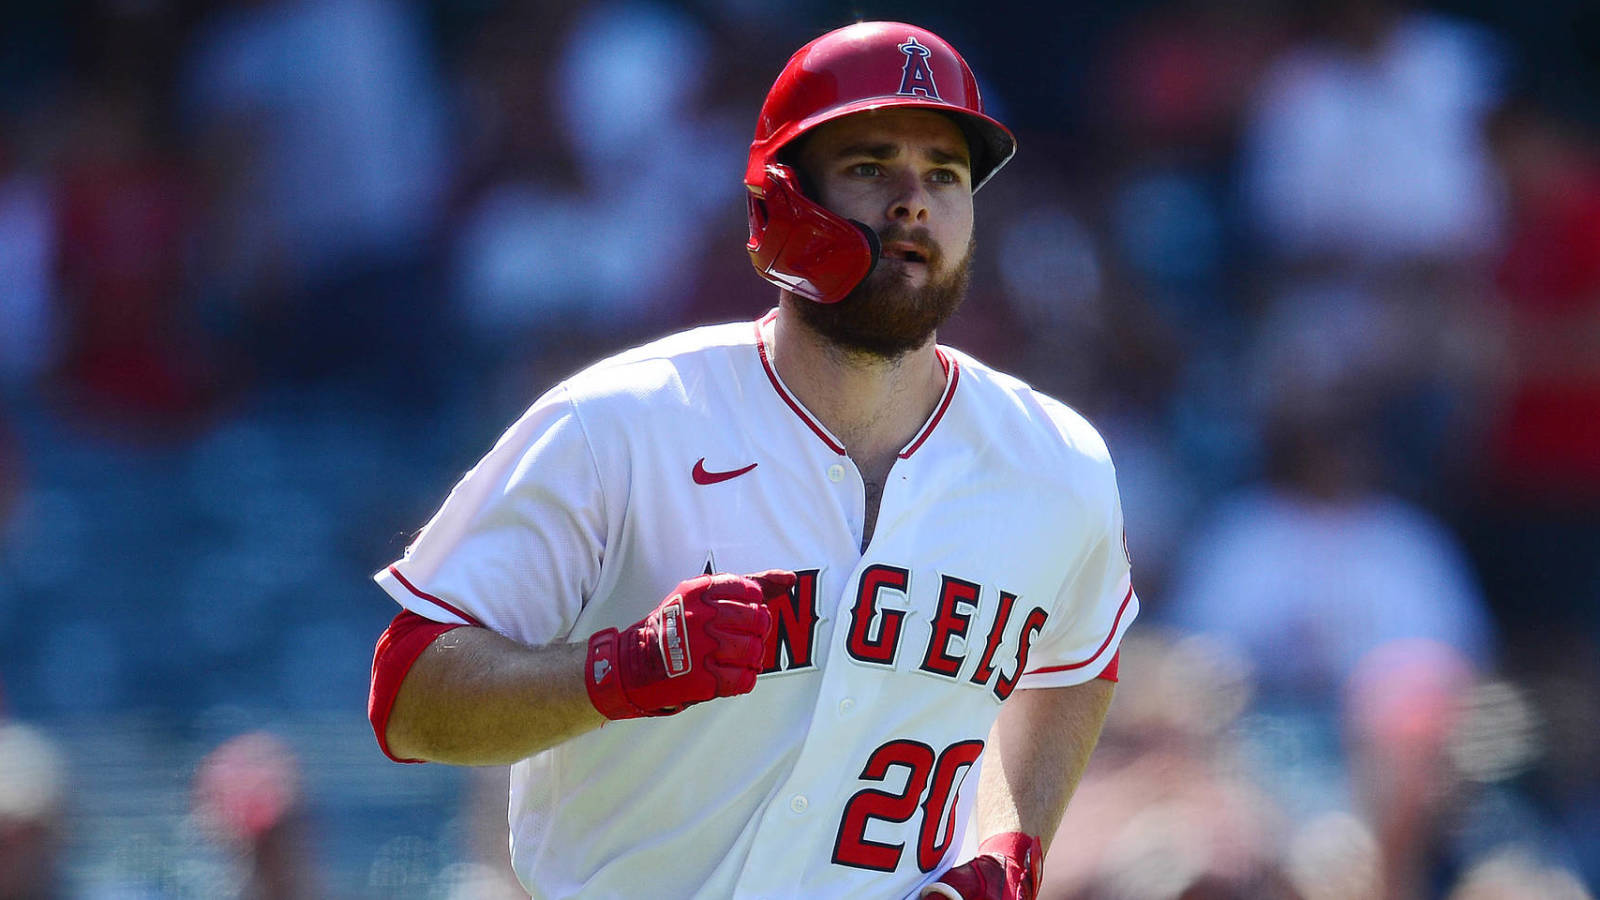 Angels place Jared Walsh on IL with intercostal strain